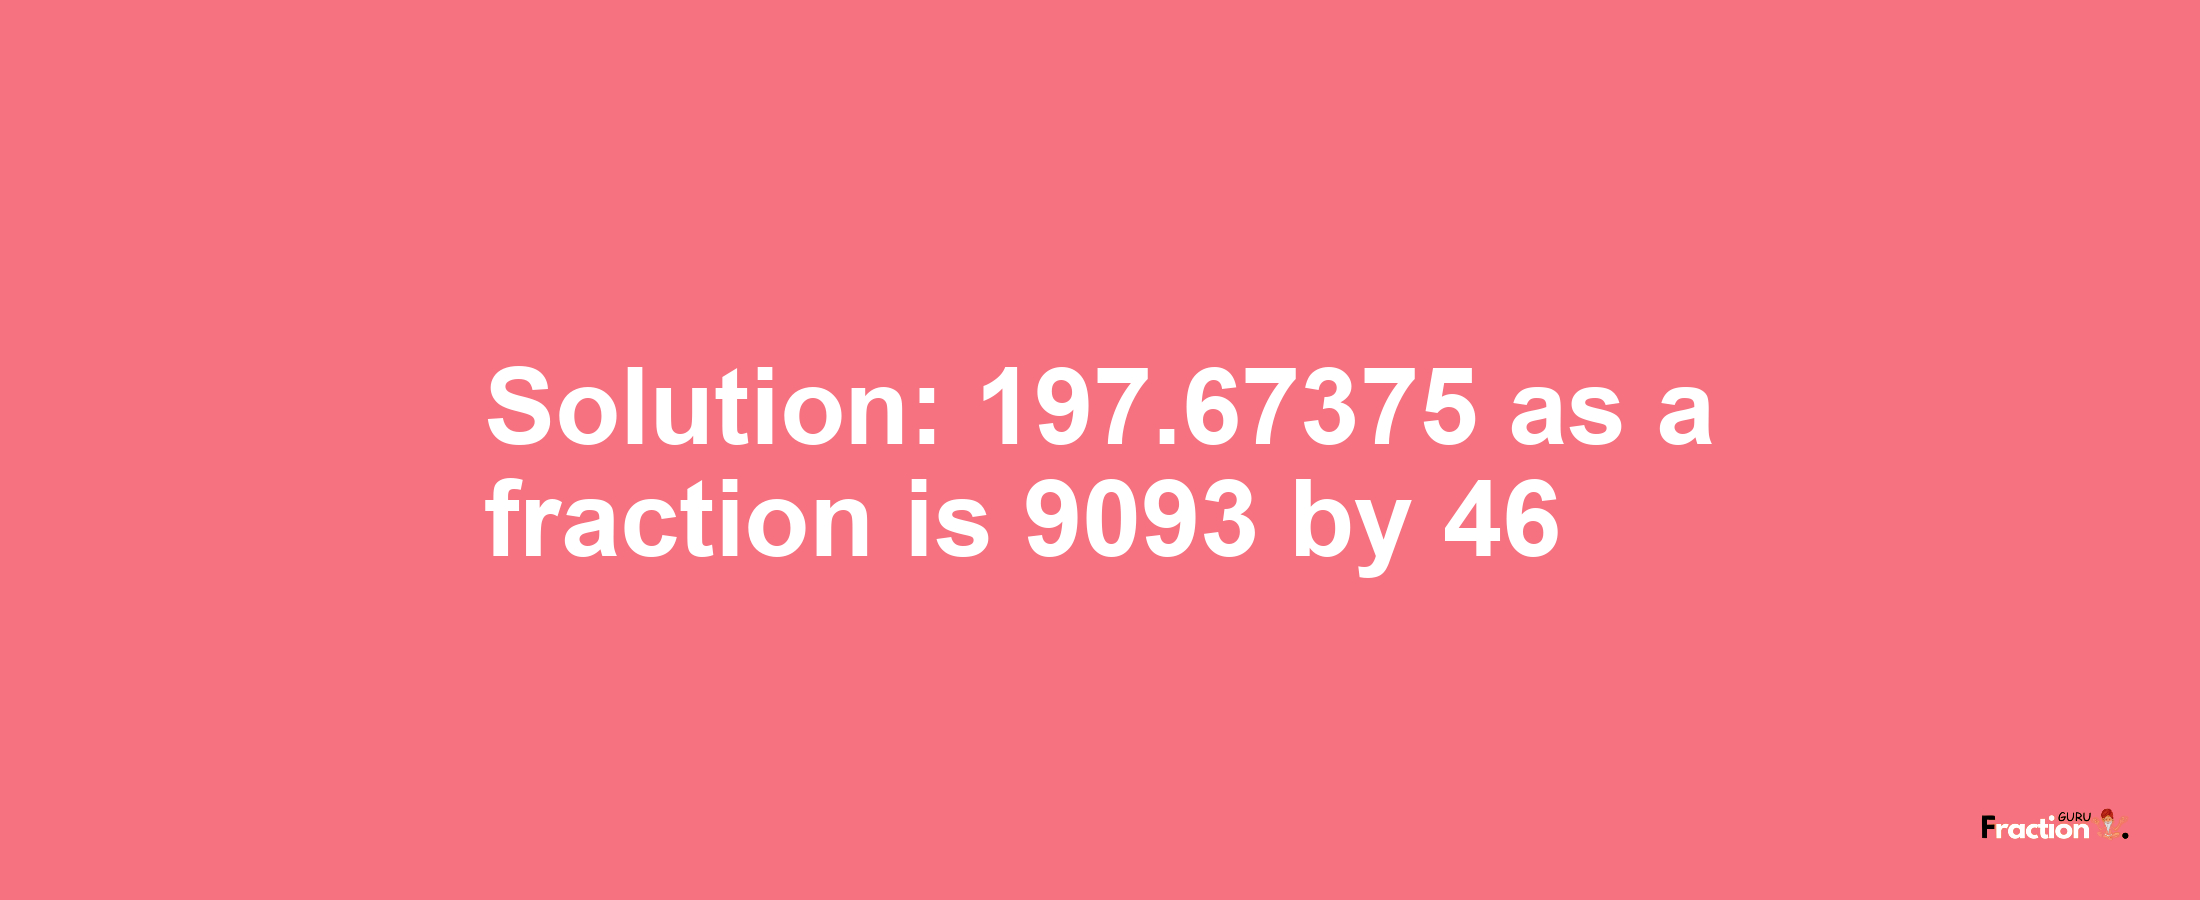 Solution:197.67375 as a fraction is 9093/46